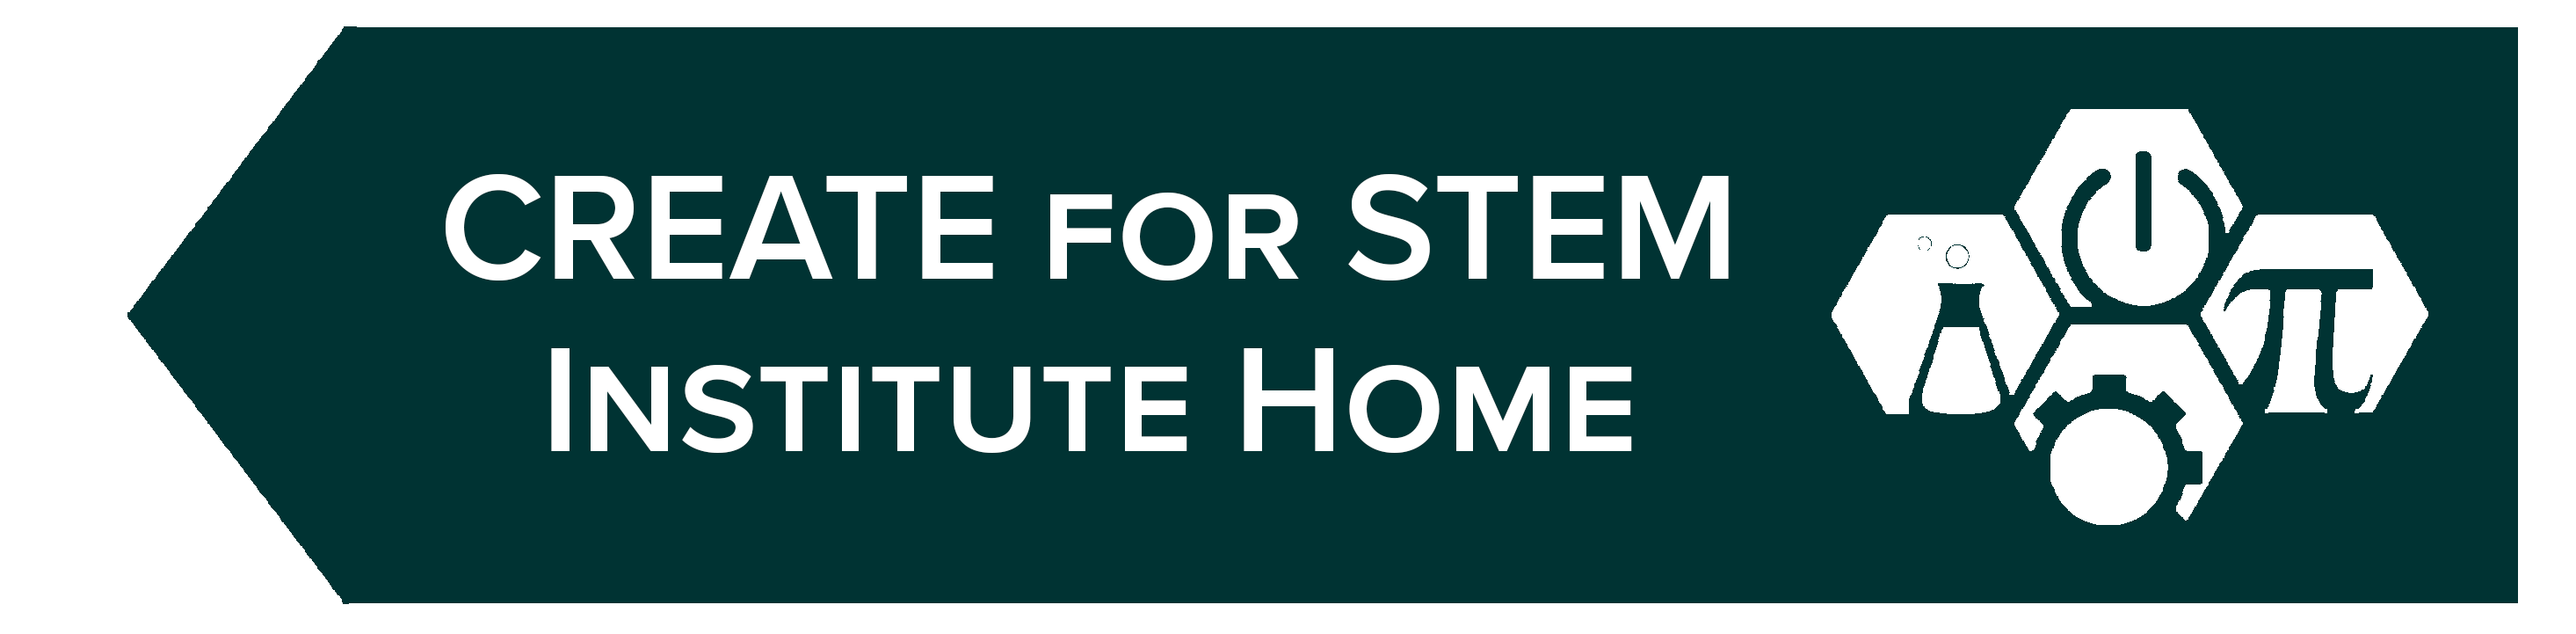 Button to go to the CREATE for STEM Institute main site.